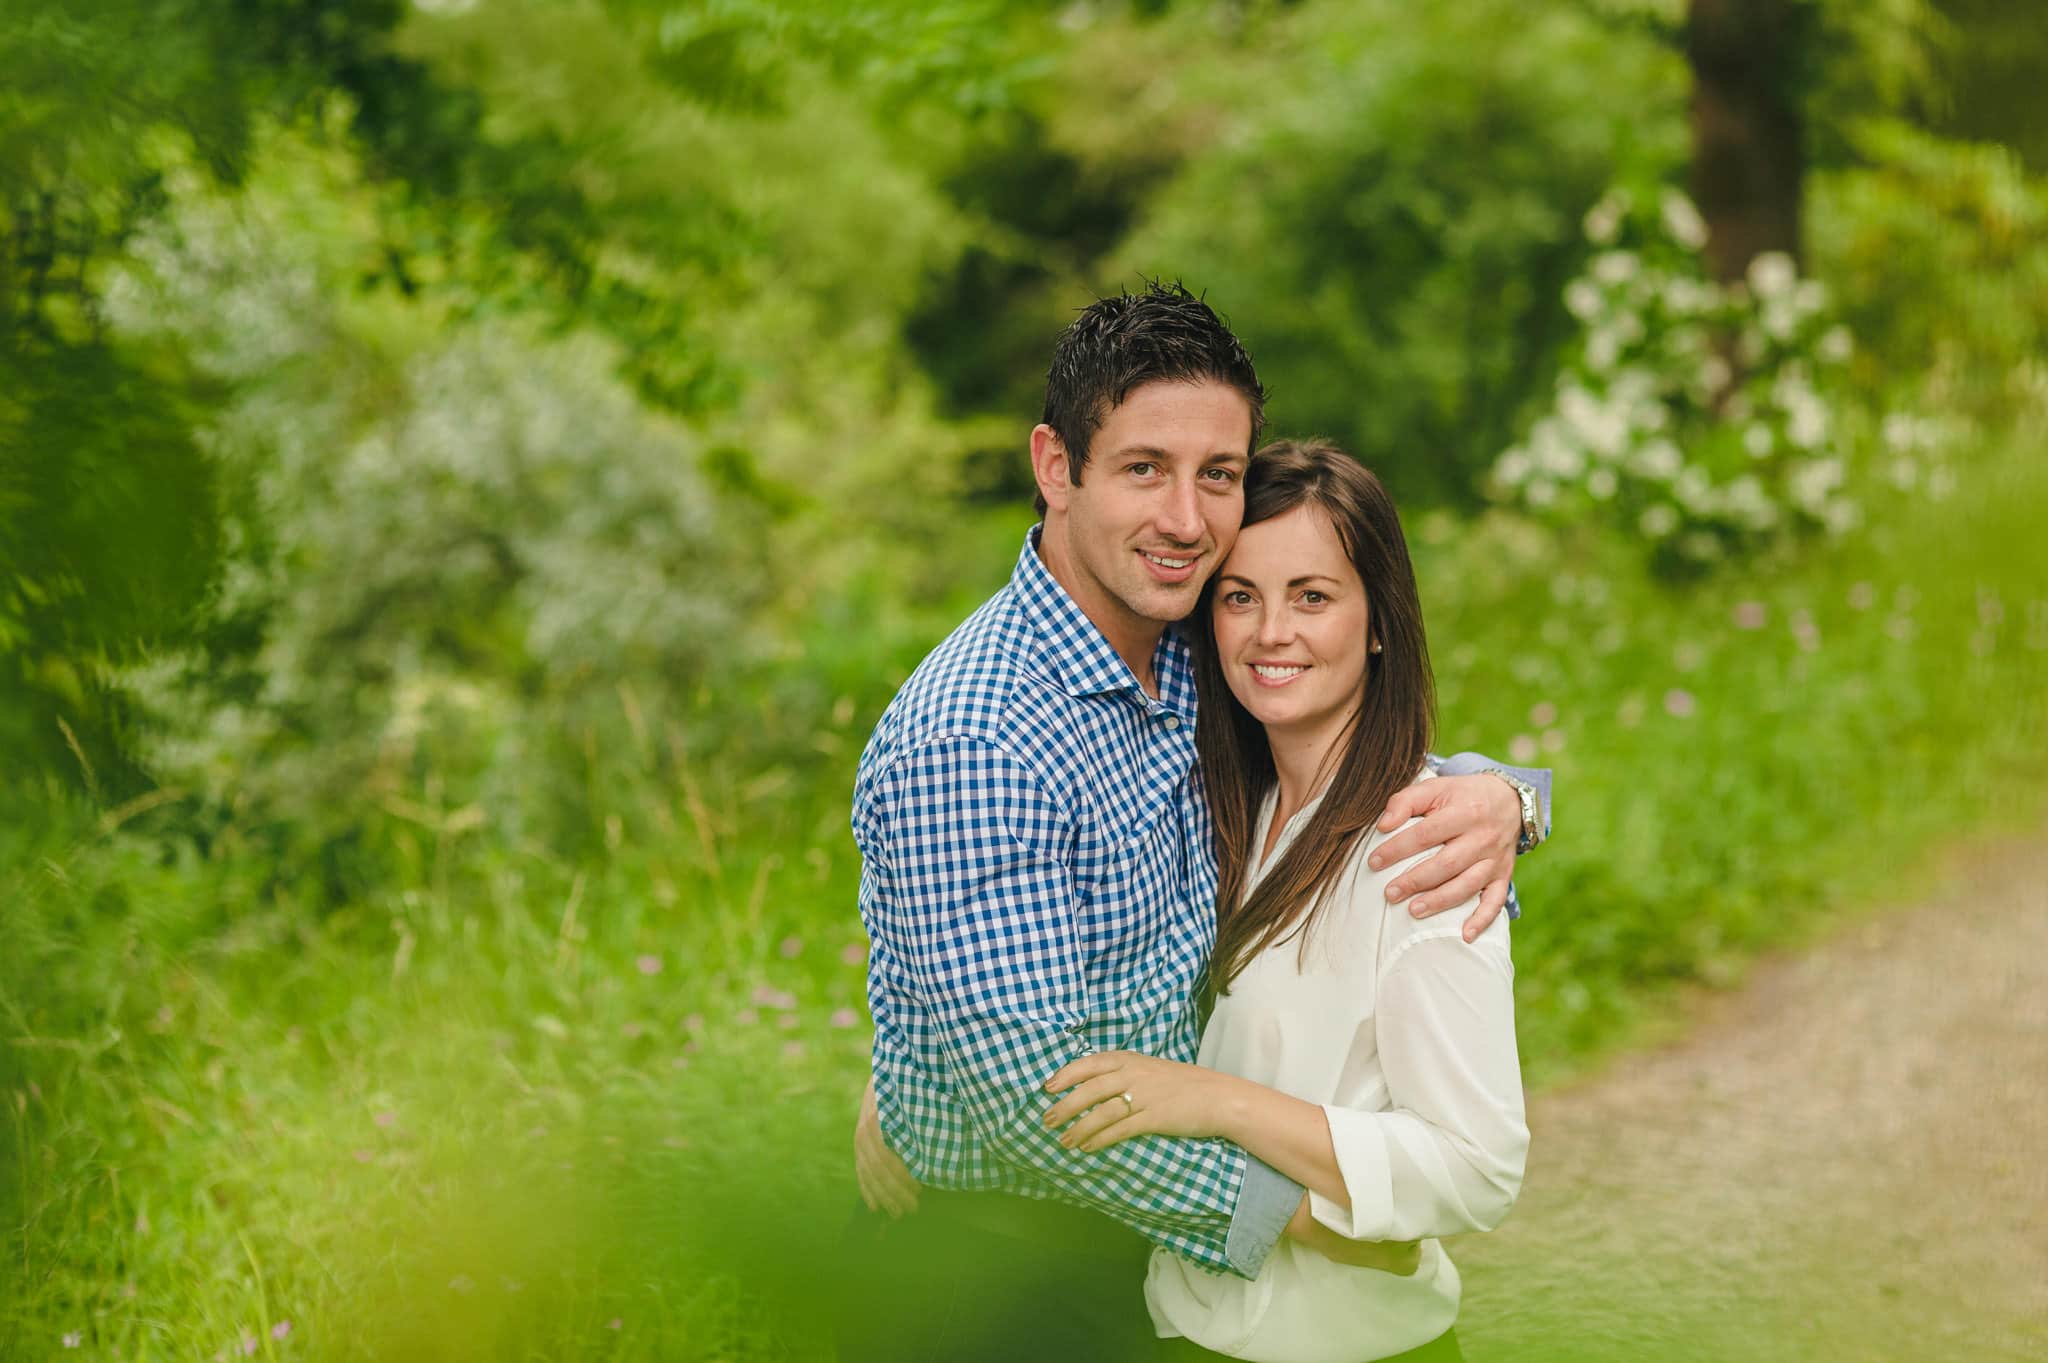 Dean + Sarah's pre wedding photography session in Herefordshire, West Midlands 26